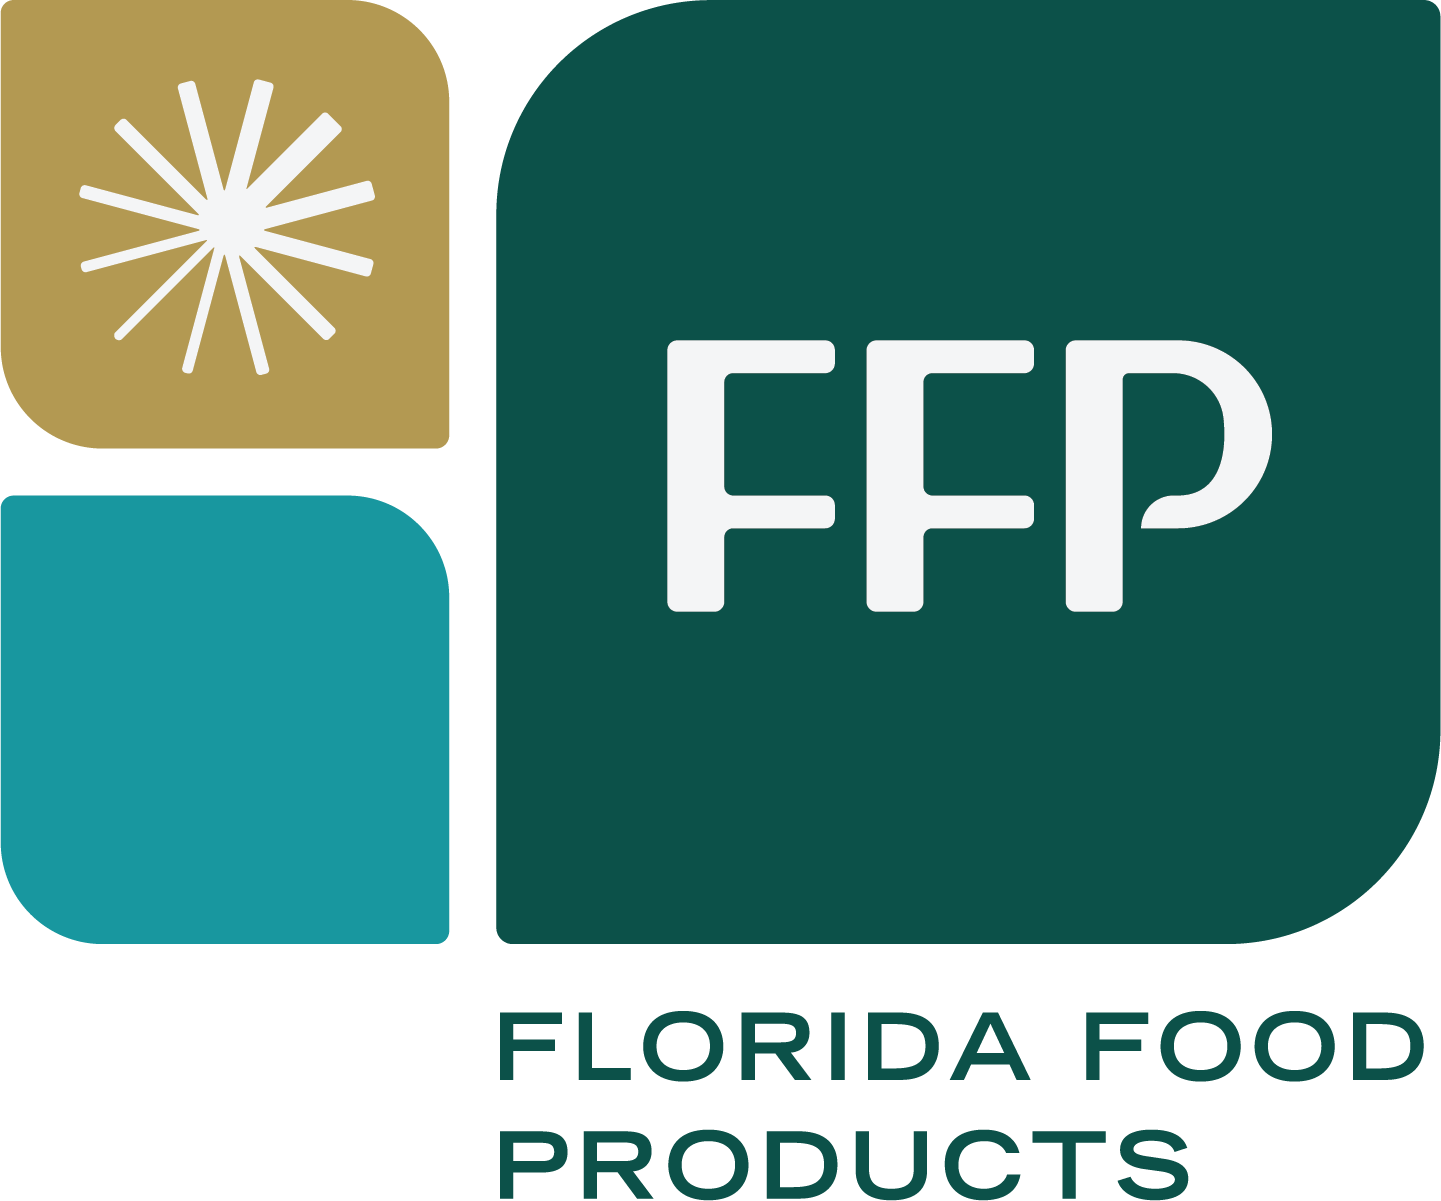 Ardian Acquires Majority Stake in Florida Food Products and Forms Partnership With MidOcean